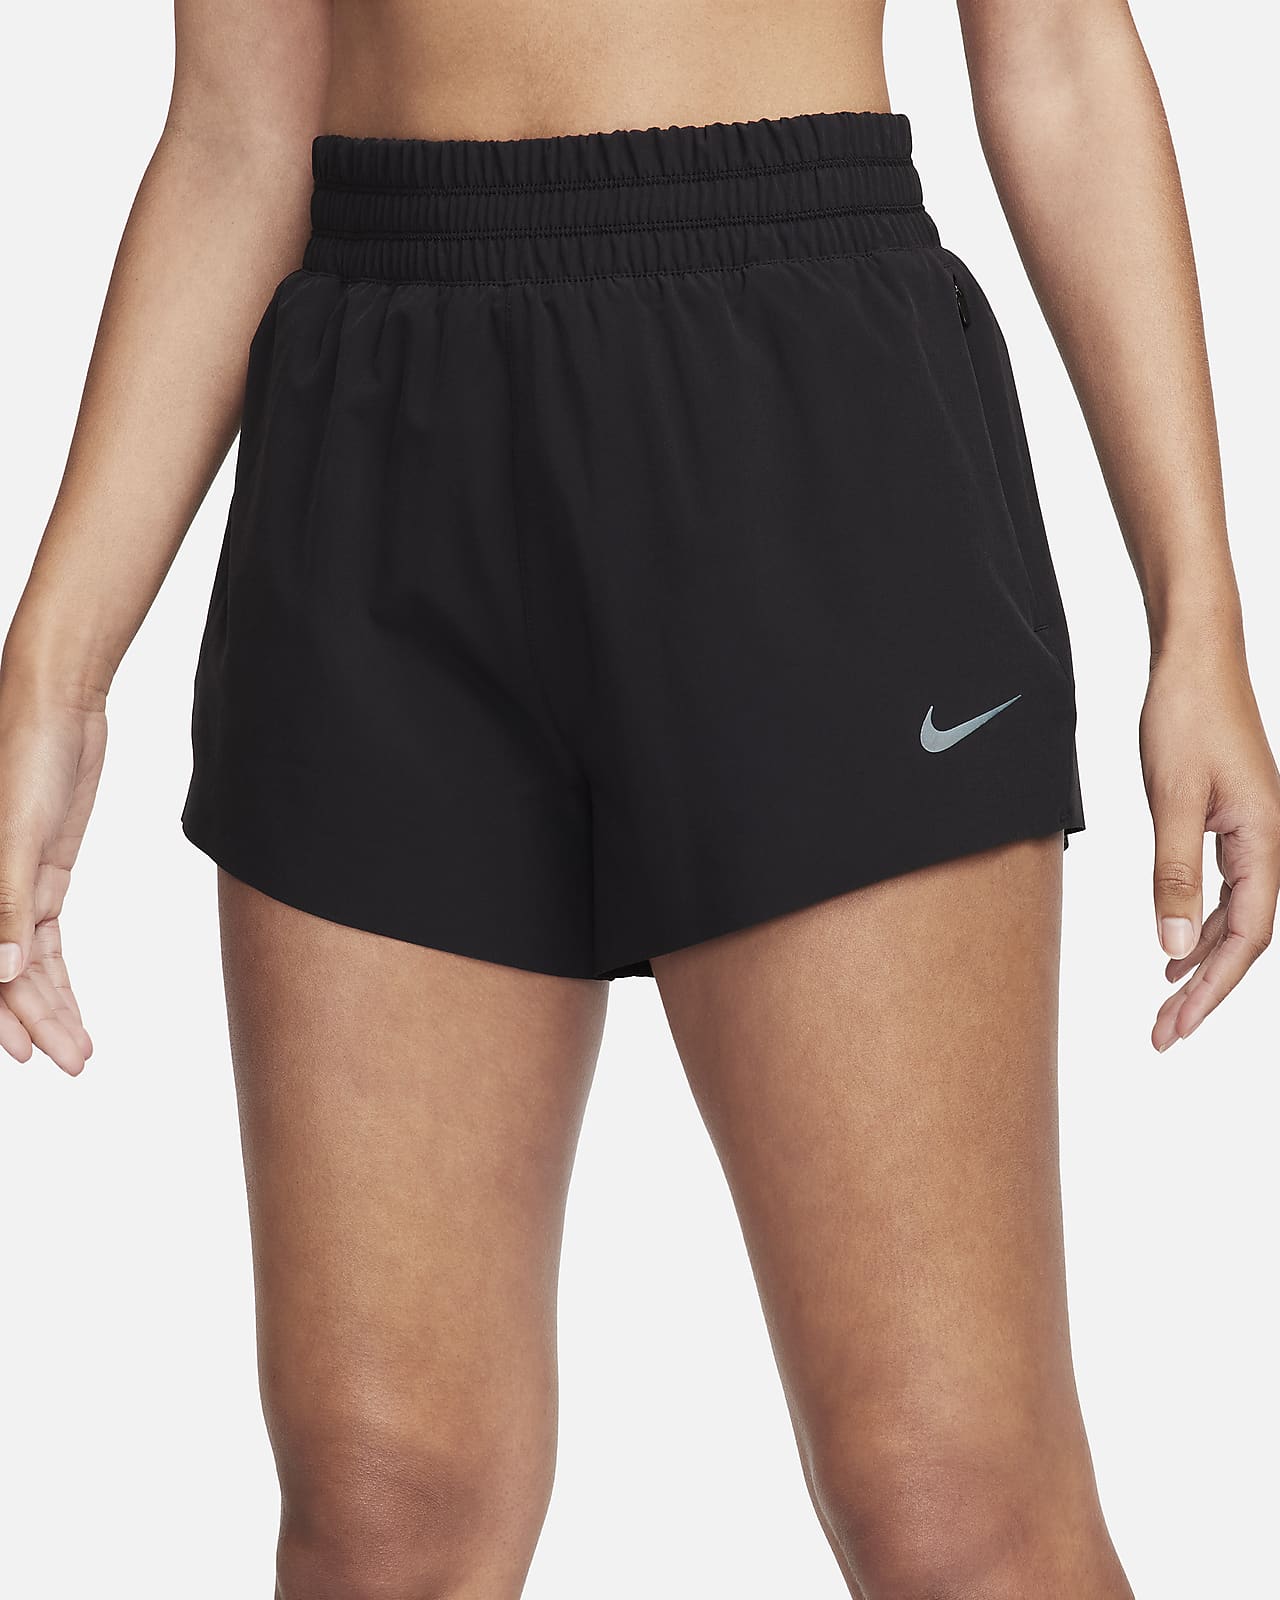 https://static.nike.com/a/images/t_PDP_1280_v1/f_auto,q_auto:eco/25a6ea8b-3c5c-44cf-a6b5-6ddaa4b4e668/dri-fit-running-division-high-waisted-7-5cm-brief-lined-running-shorts-with-pockets-x09SBX.png